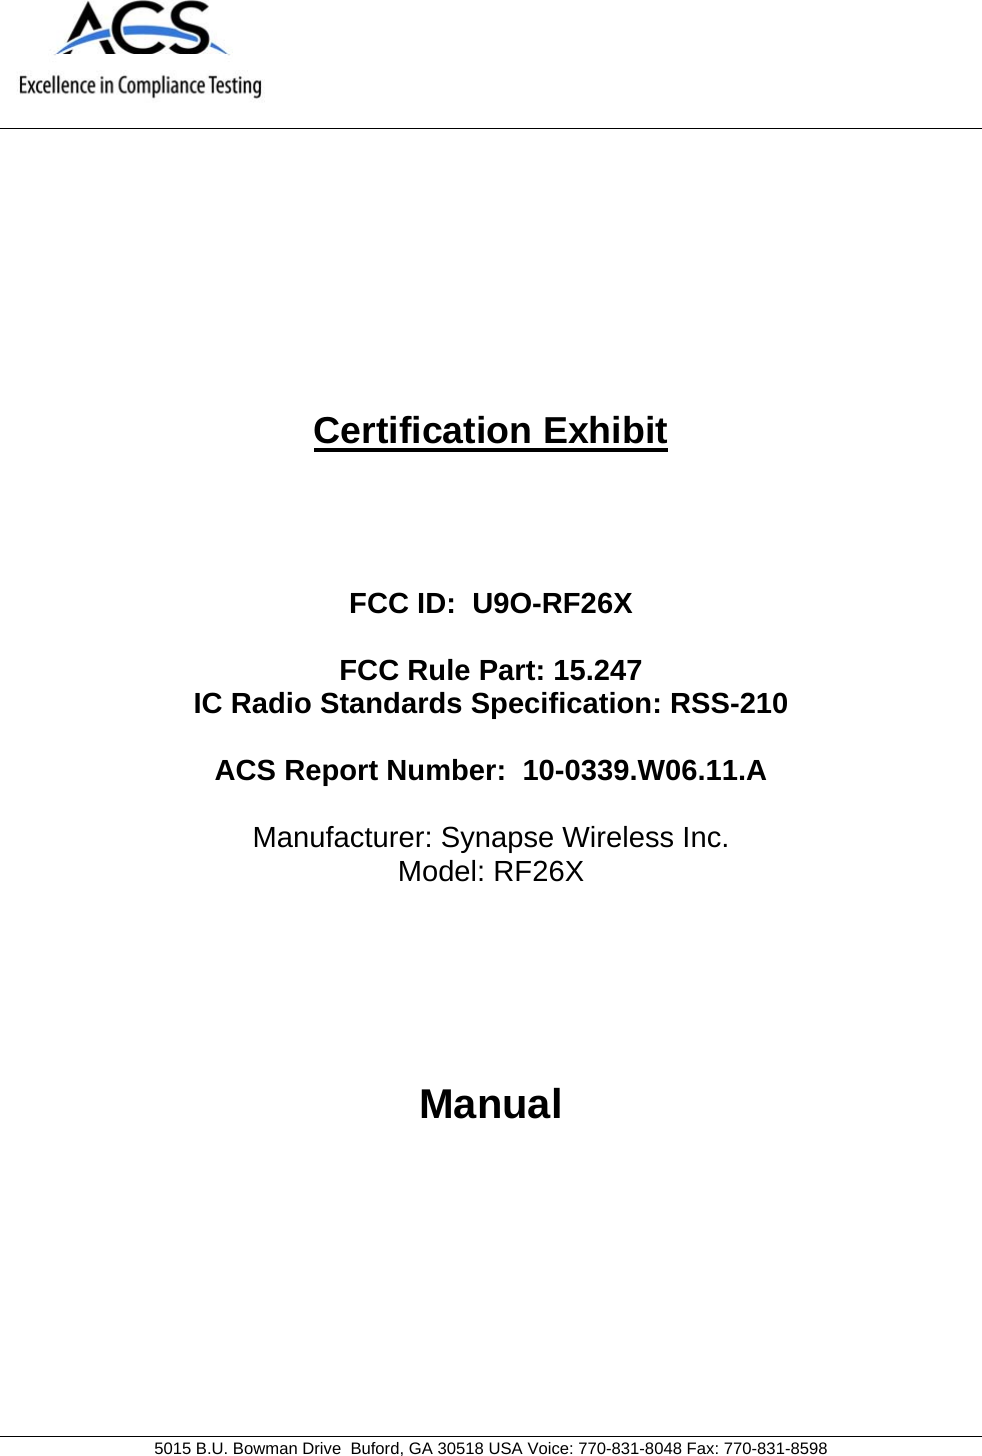     5015 B.U. Bowman Drive  Buford, GA 30518 USA Voice: 770-831-8048 Fax: 770-831-8598   Certification Exhibit     FCC ID:  U9O-RF26X  FCC Rule Part: 15.247 IC Radio Standards Specification: RSS-210  ACS Report Number:  10-0339.W06.11.A   Manufacturer: Synapse Wireless Inc. Model: RF26X     Manual  